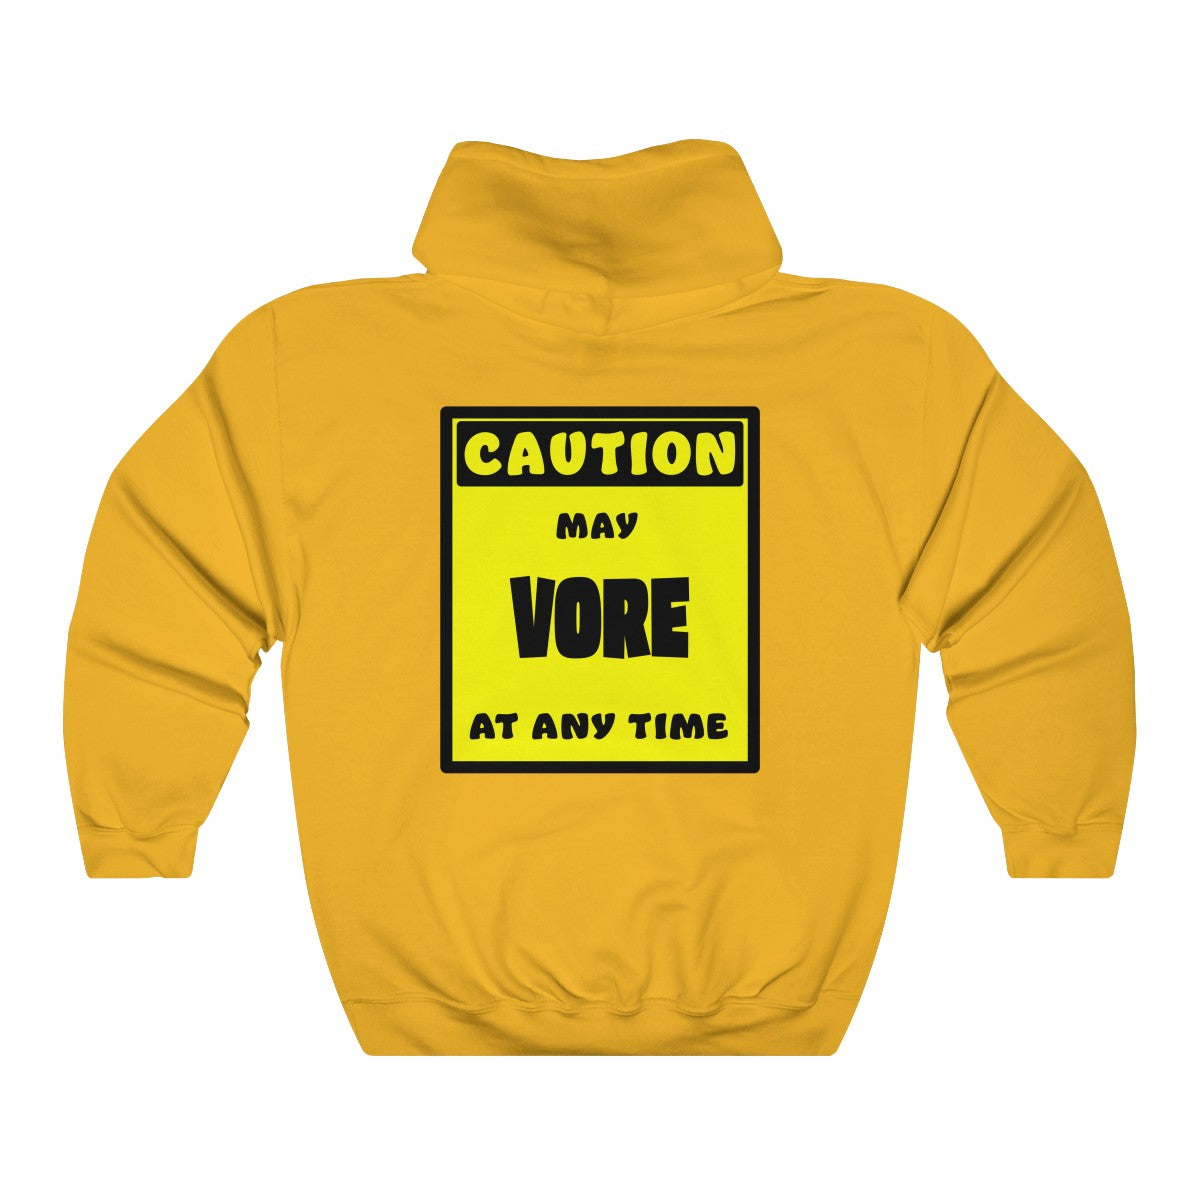 CAUTION! May VORE at any time! - Hoodie Hoodie AFLT-Whootorca Gold S 